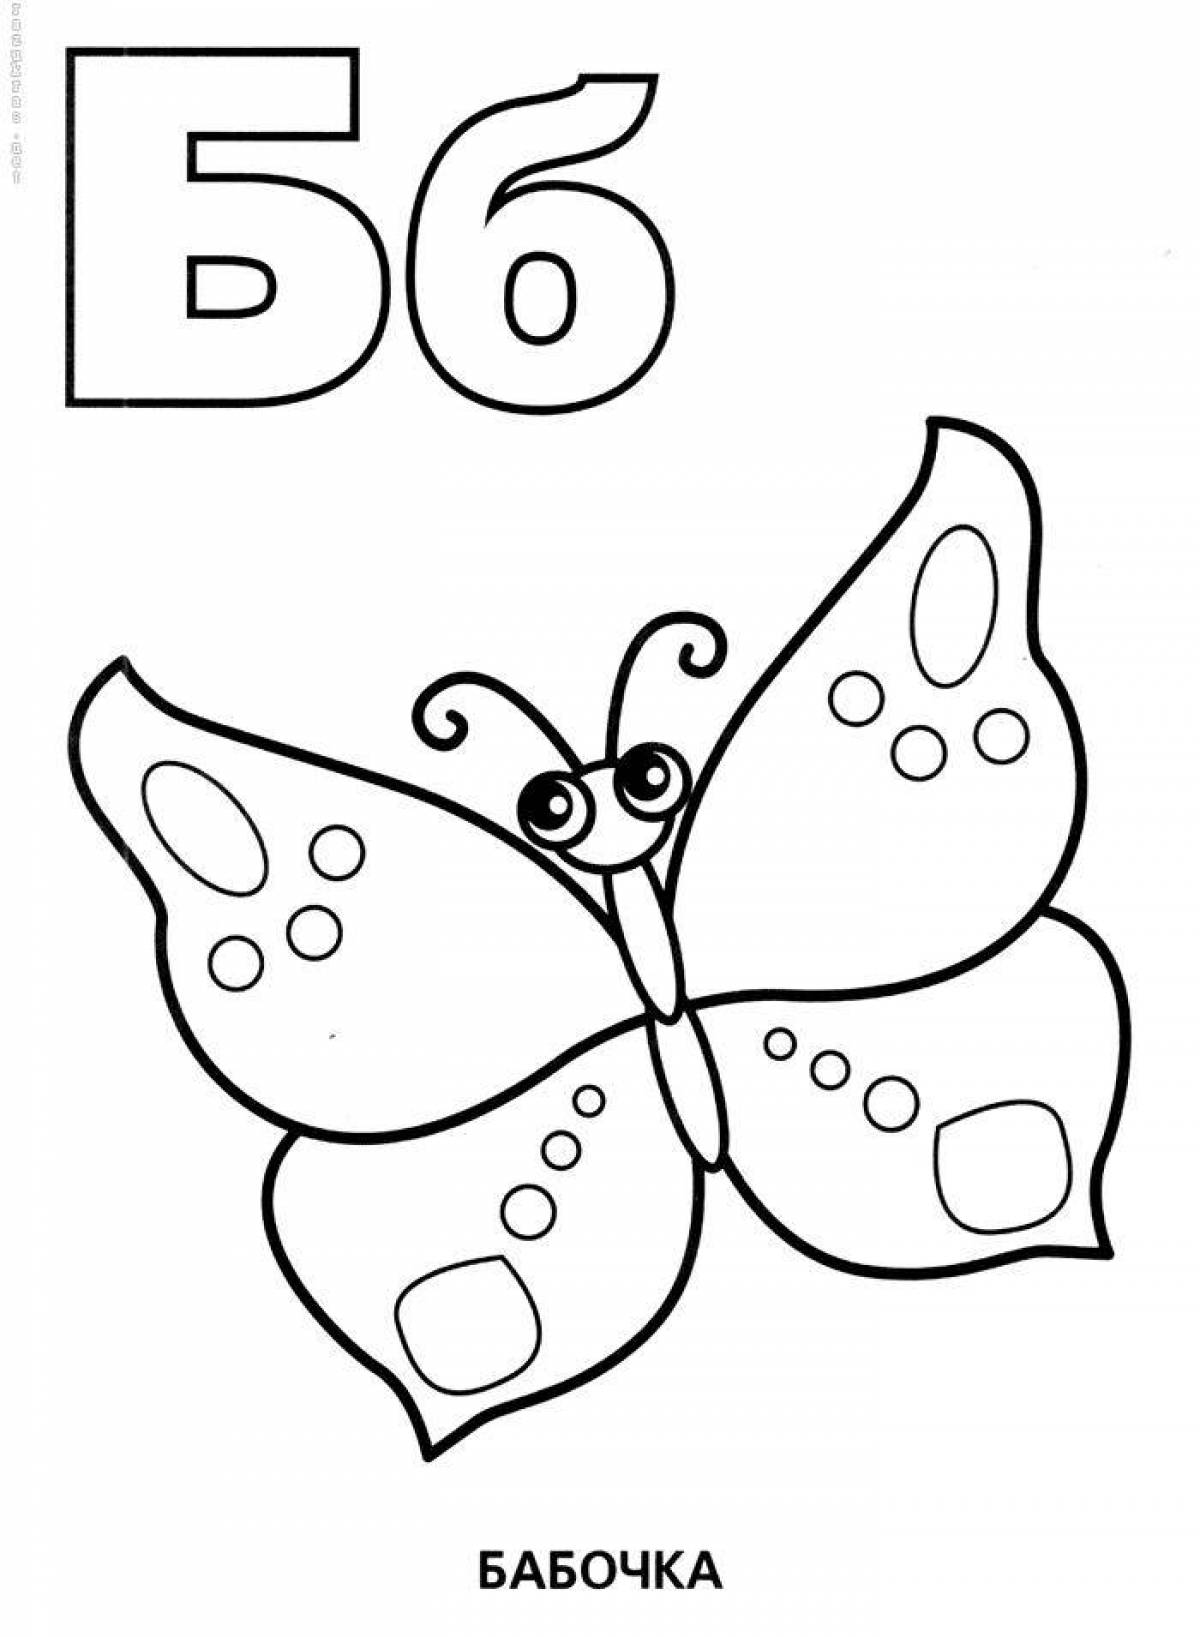 Entertaining coloring of letters for children 5-6 years old